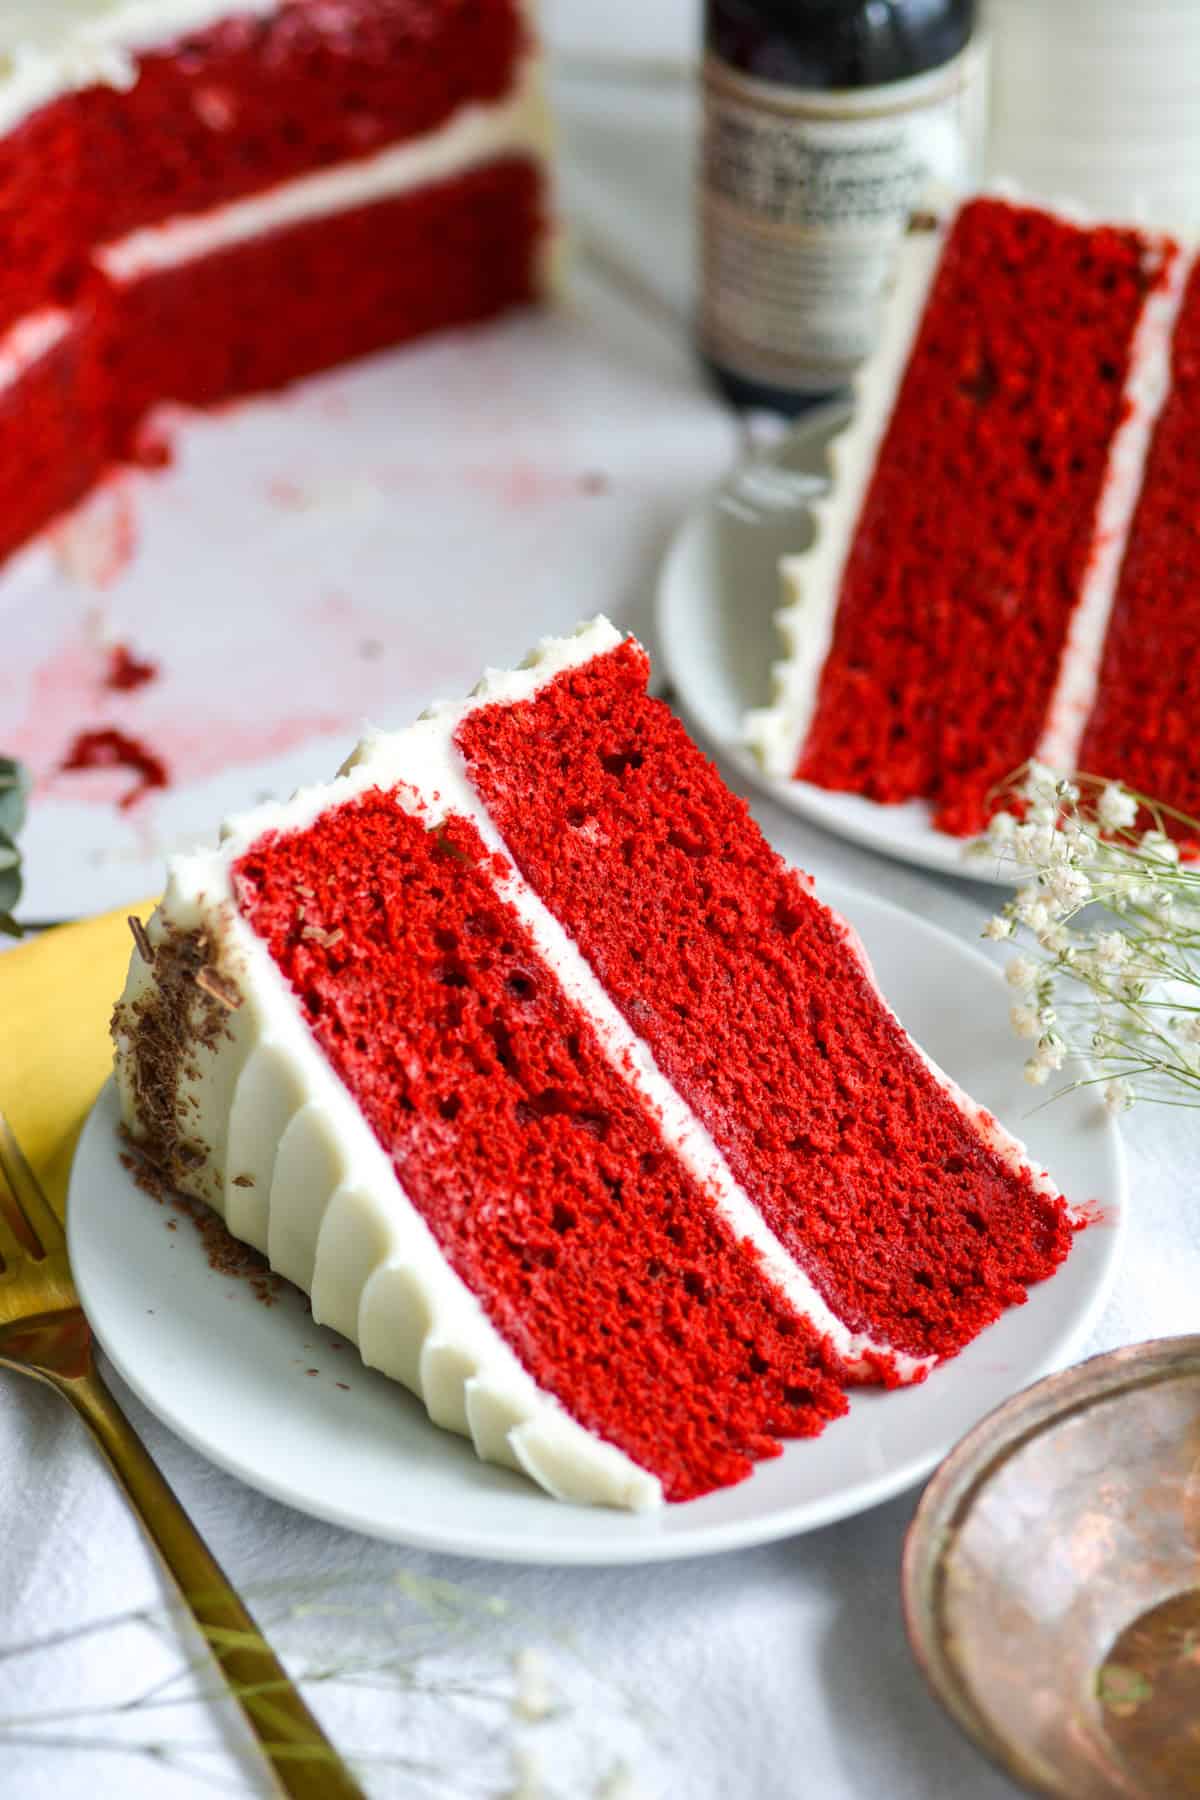 Vegan red velvet cake slice on a small plate with another cake slice behind it. the remaining cake is in the background.